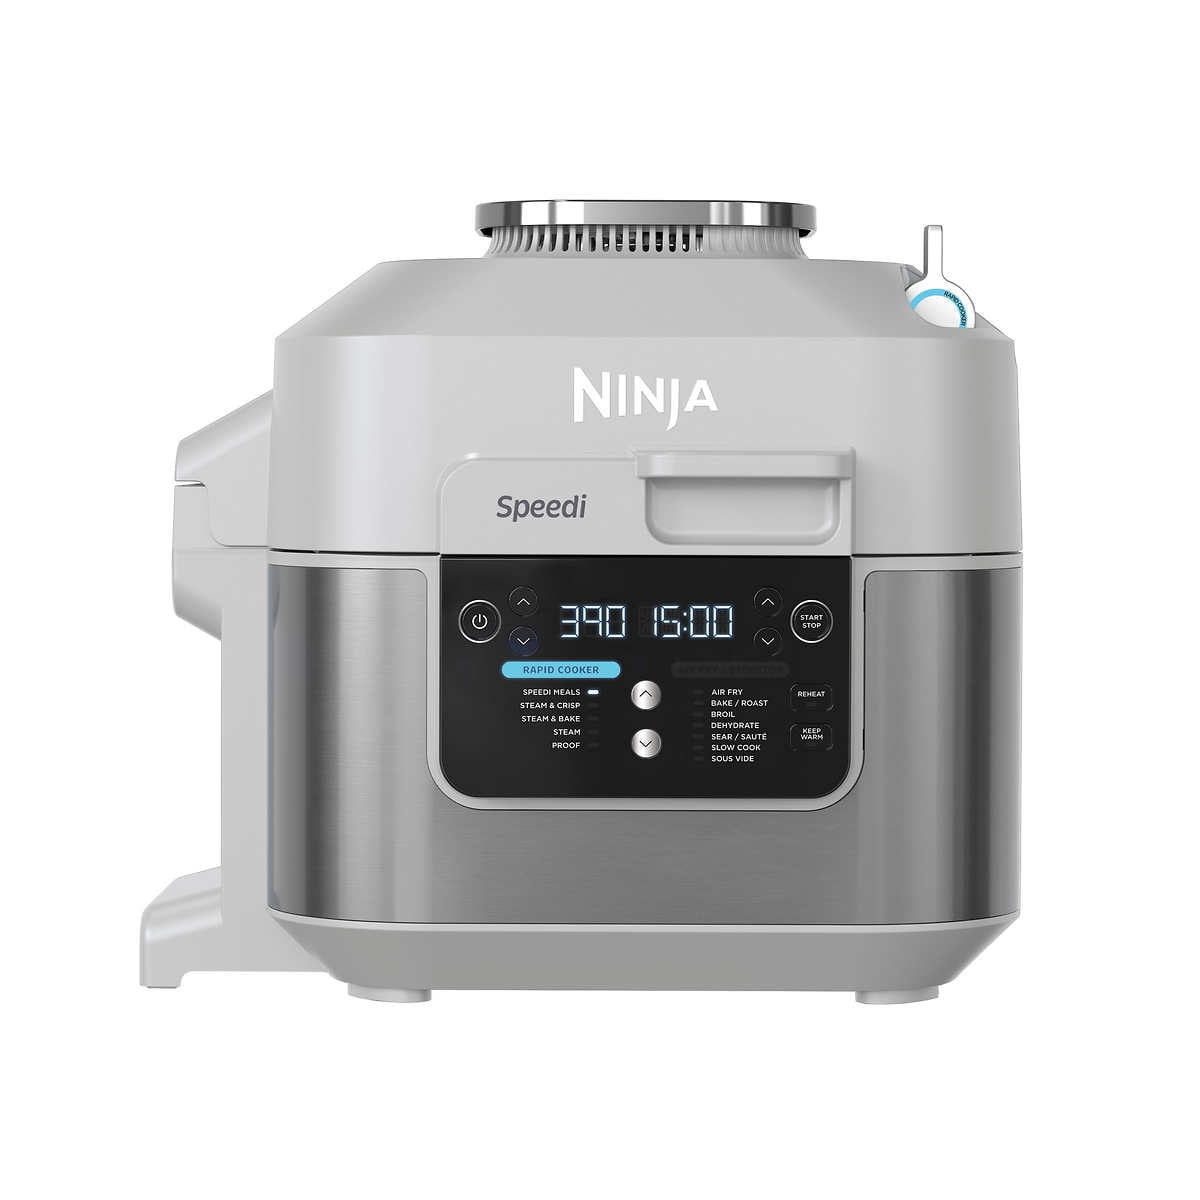 Save £91 off the Ninja Speedi 10-in-1 Rapid Cooker - Which? News